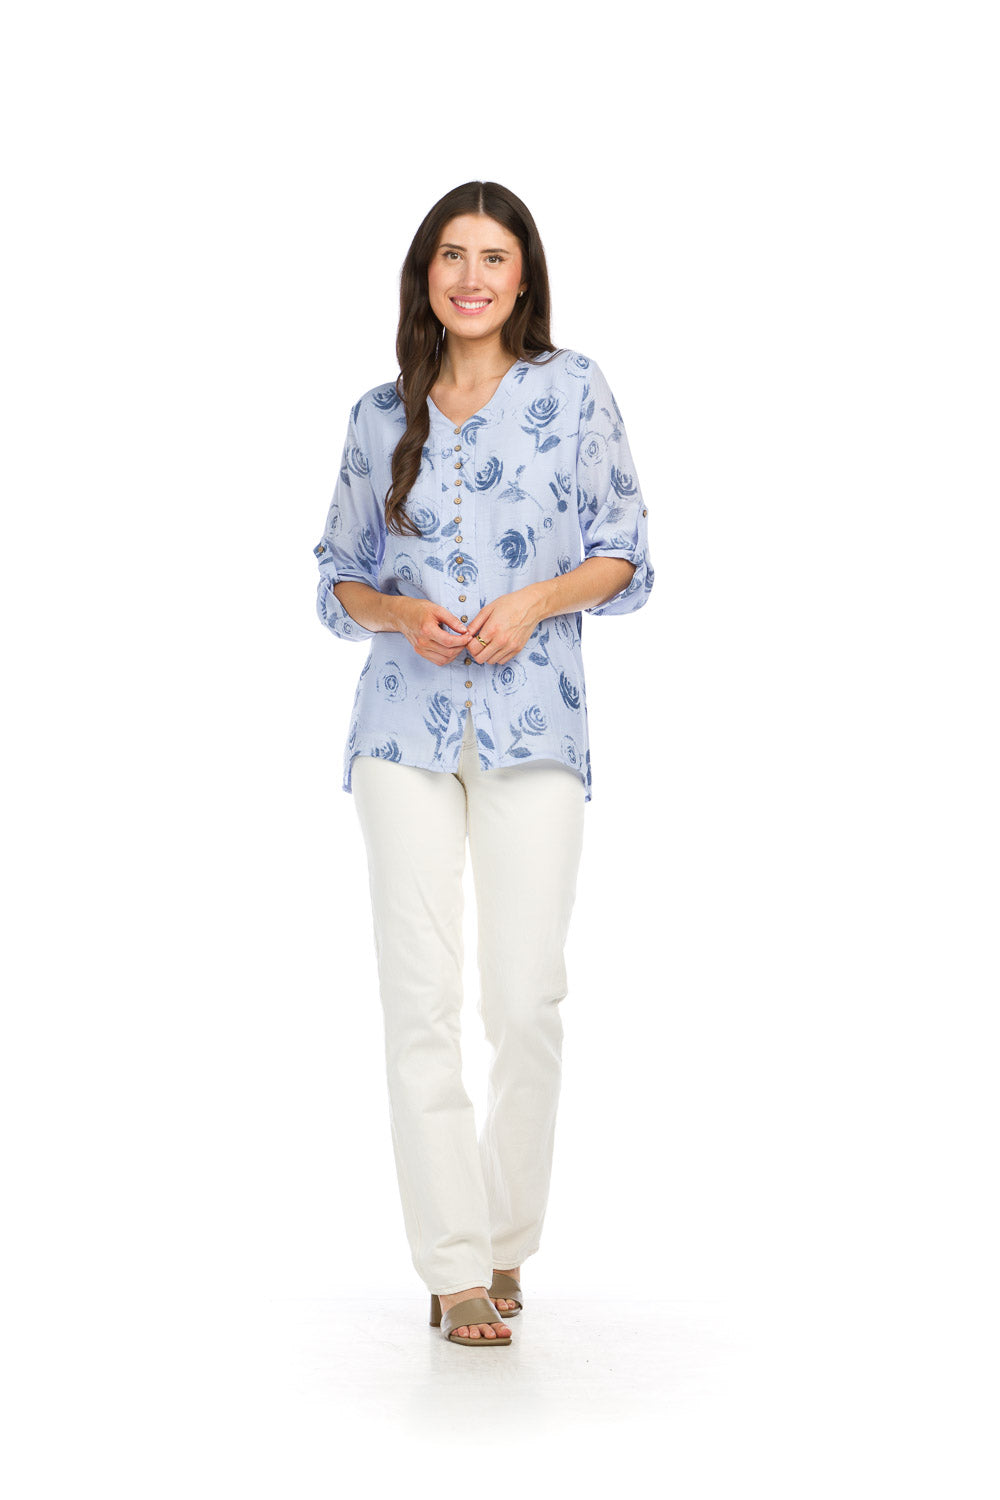 PT-16022 - MUTED ROSE PRINT BUTTON FRONT BLOUSE